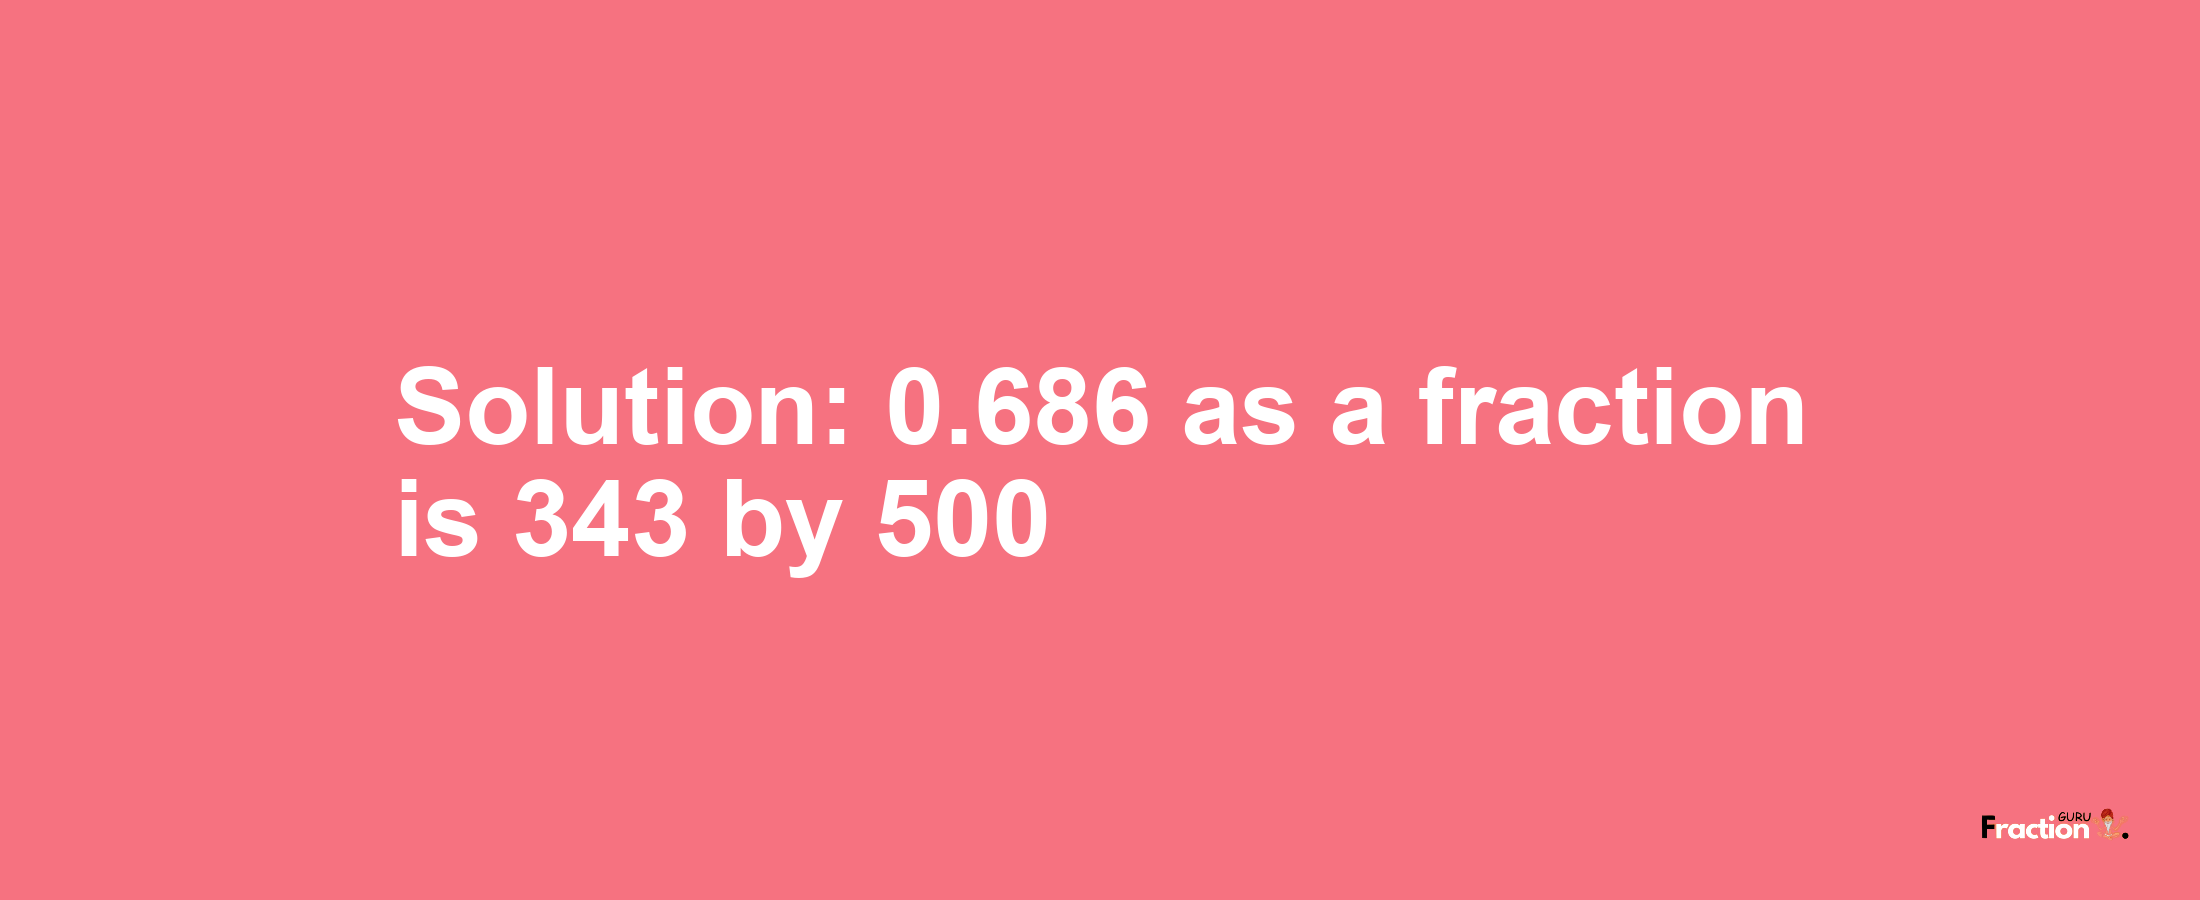 Solution:0.686 as a fraction is 343/500